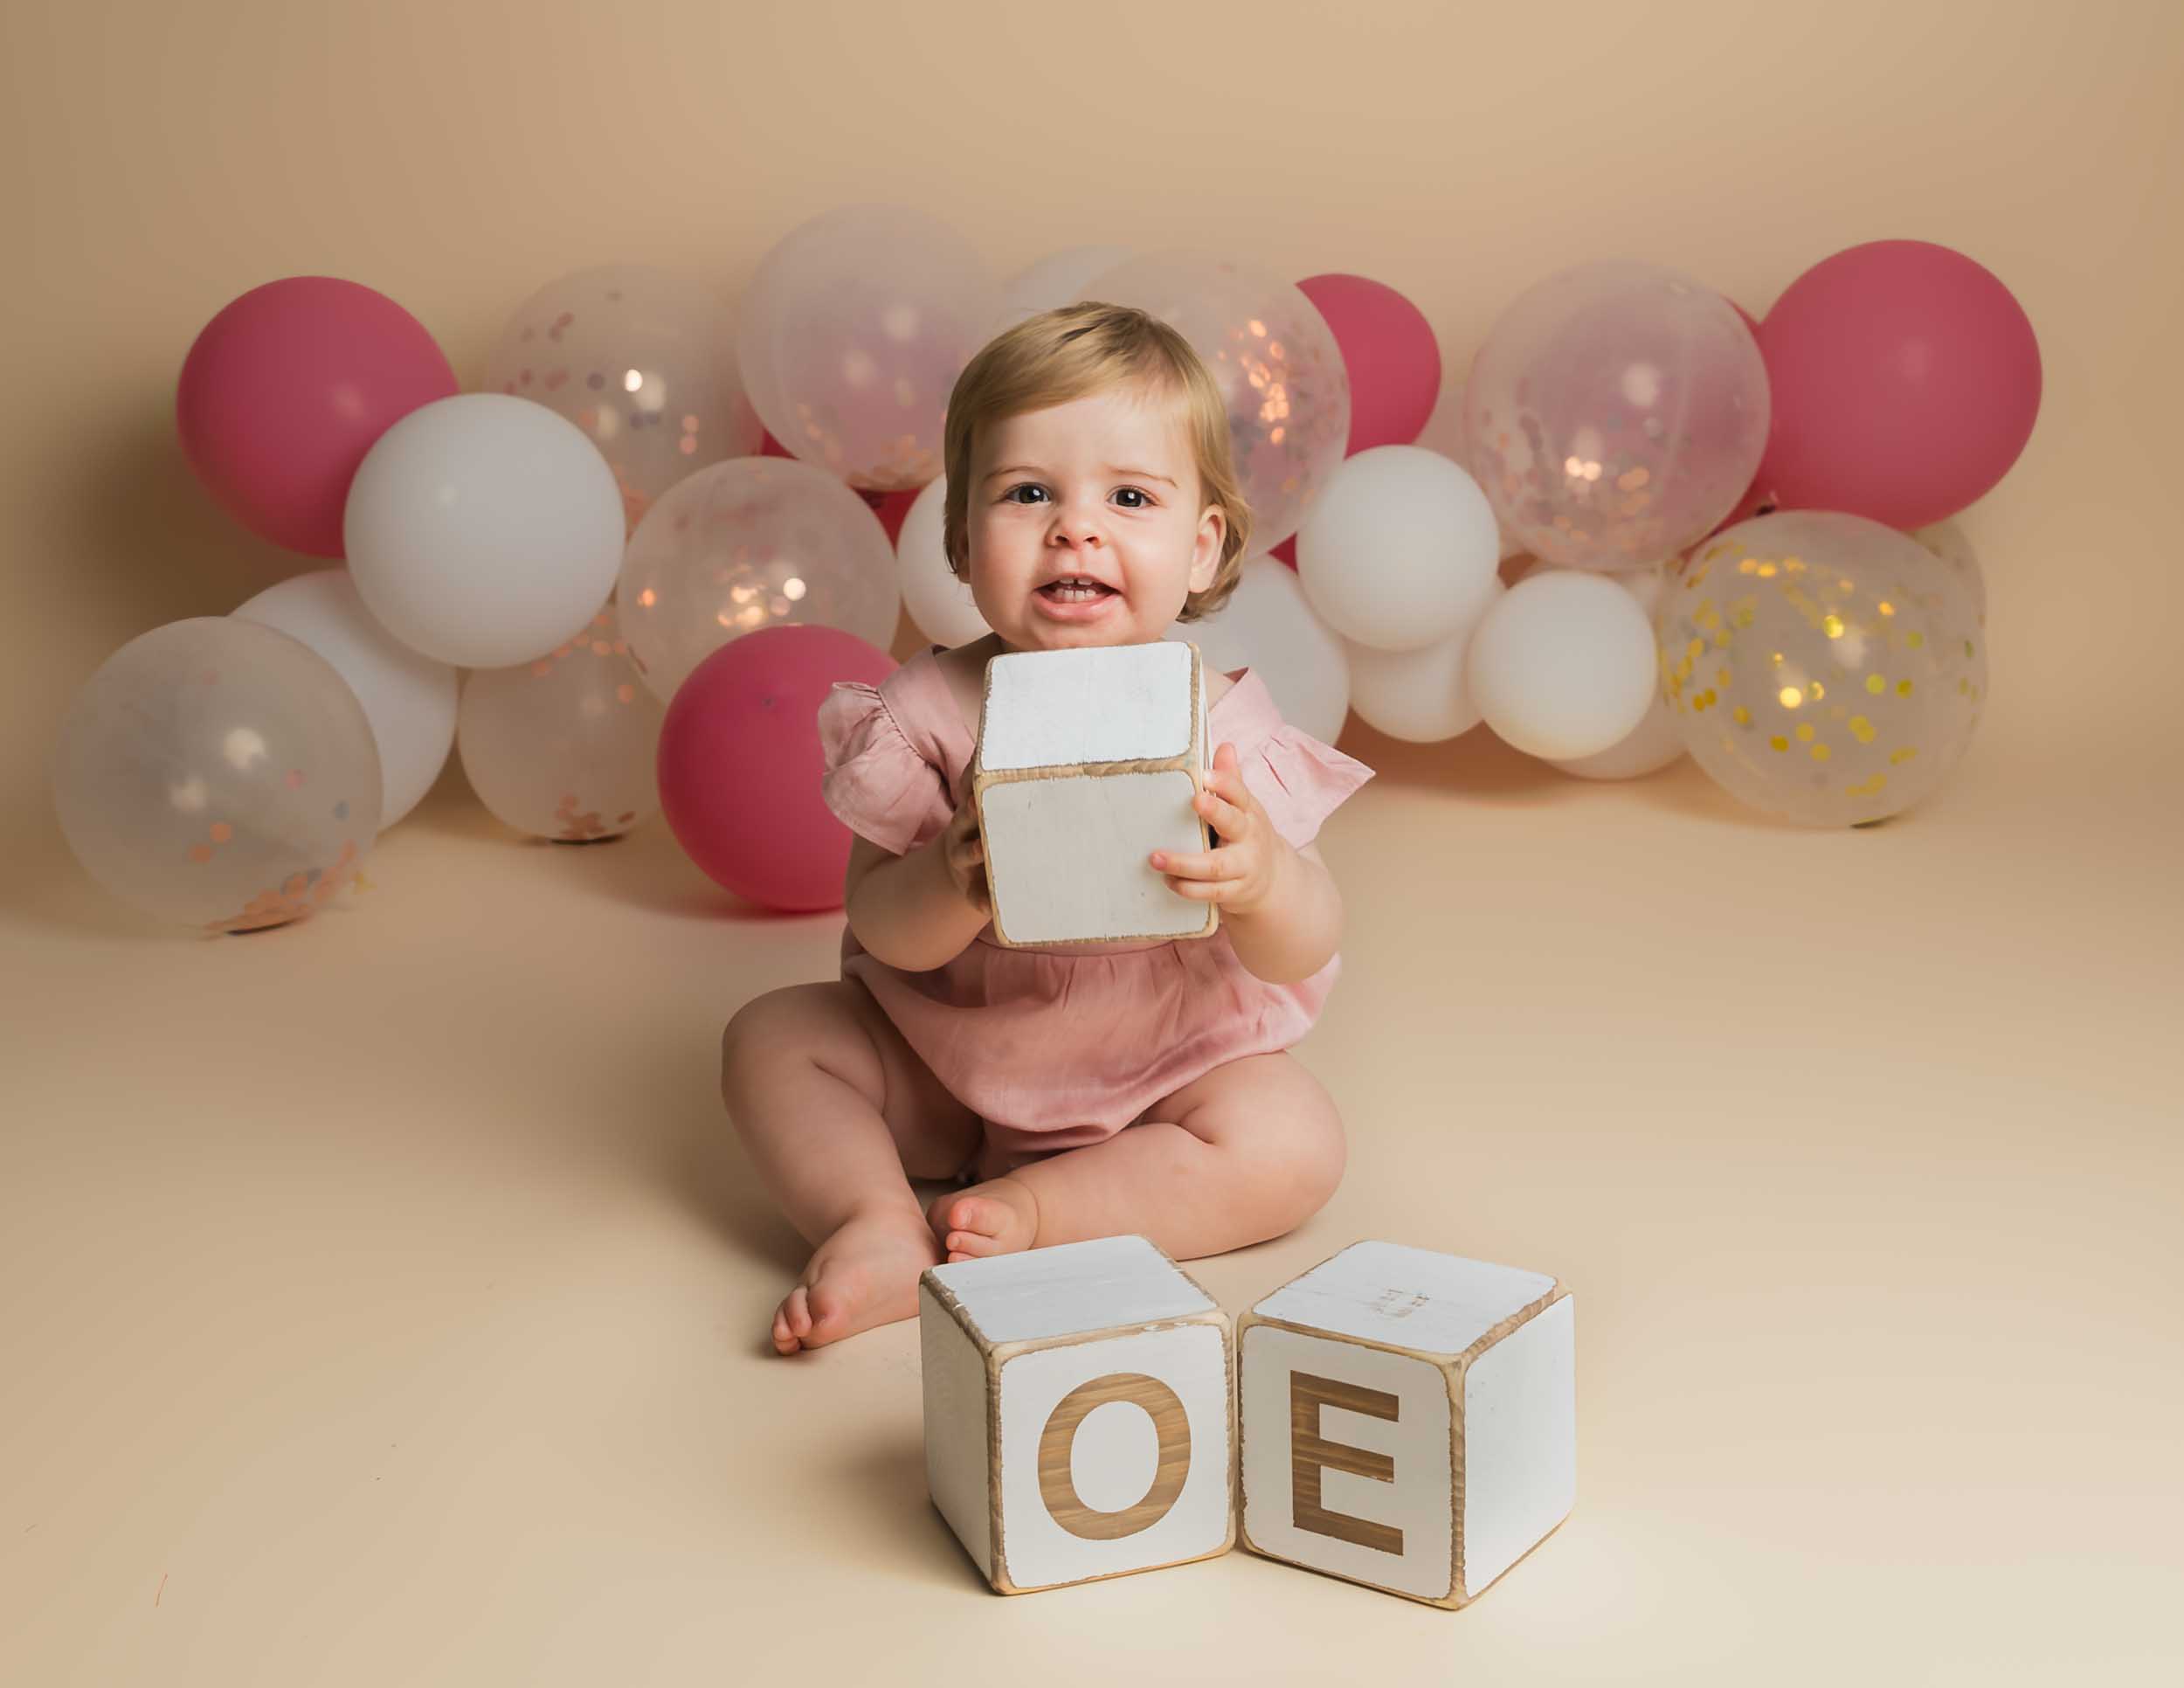 one year old sat on a cream back drop holding a wooden block and smiling at the camera